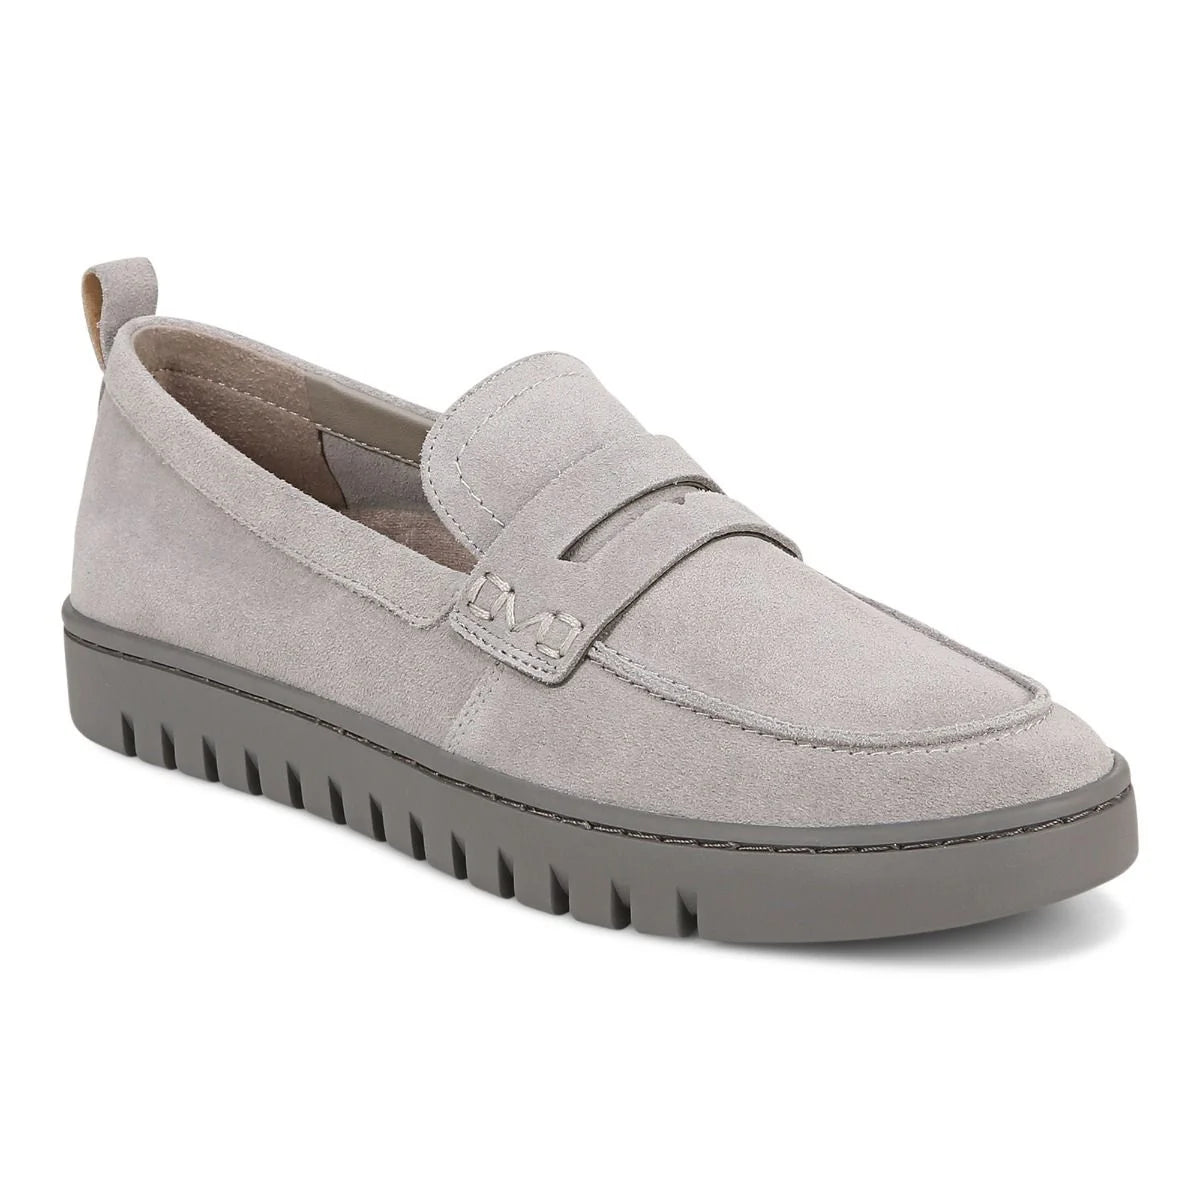 Women's Vionic Uptown Loafer Color: Light Grey Suede 